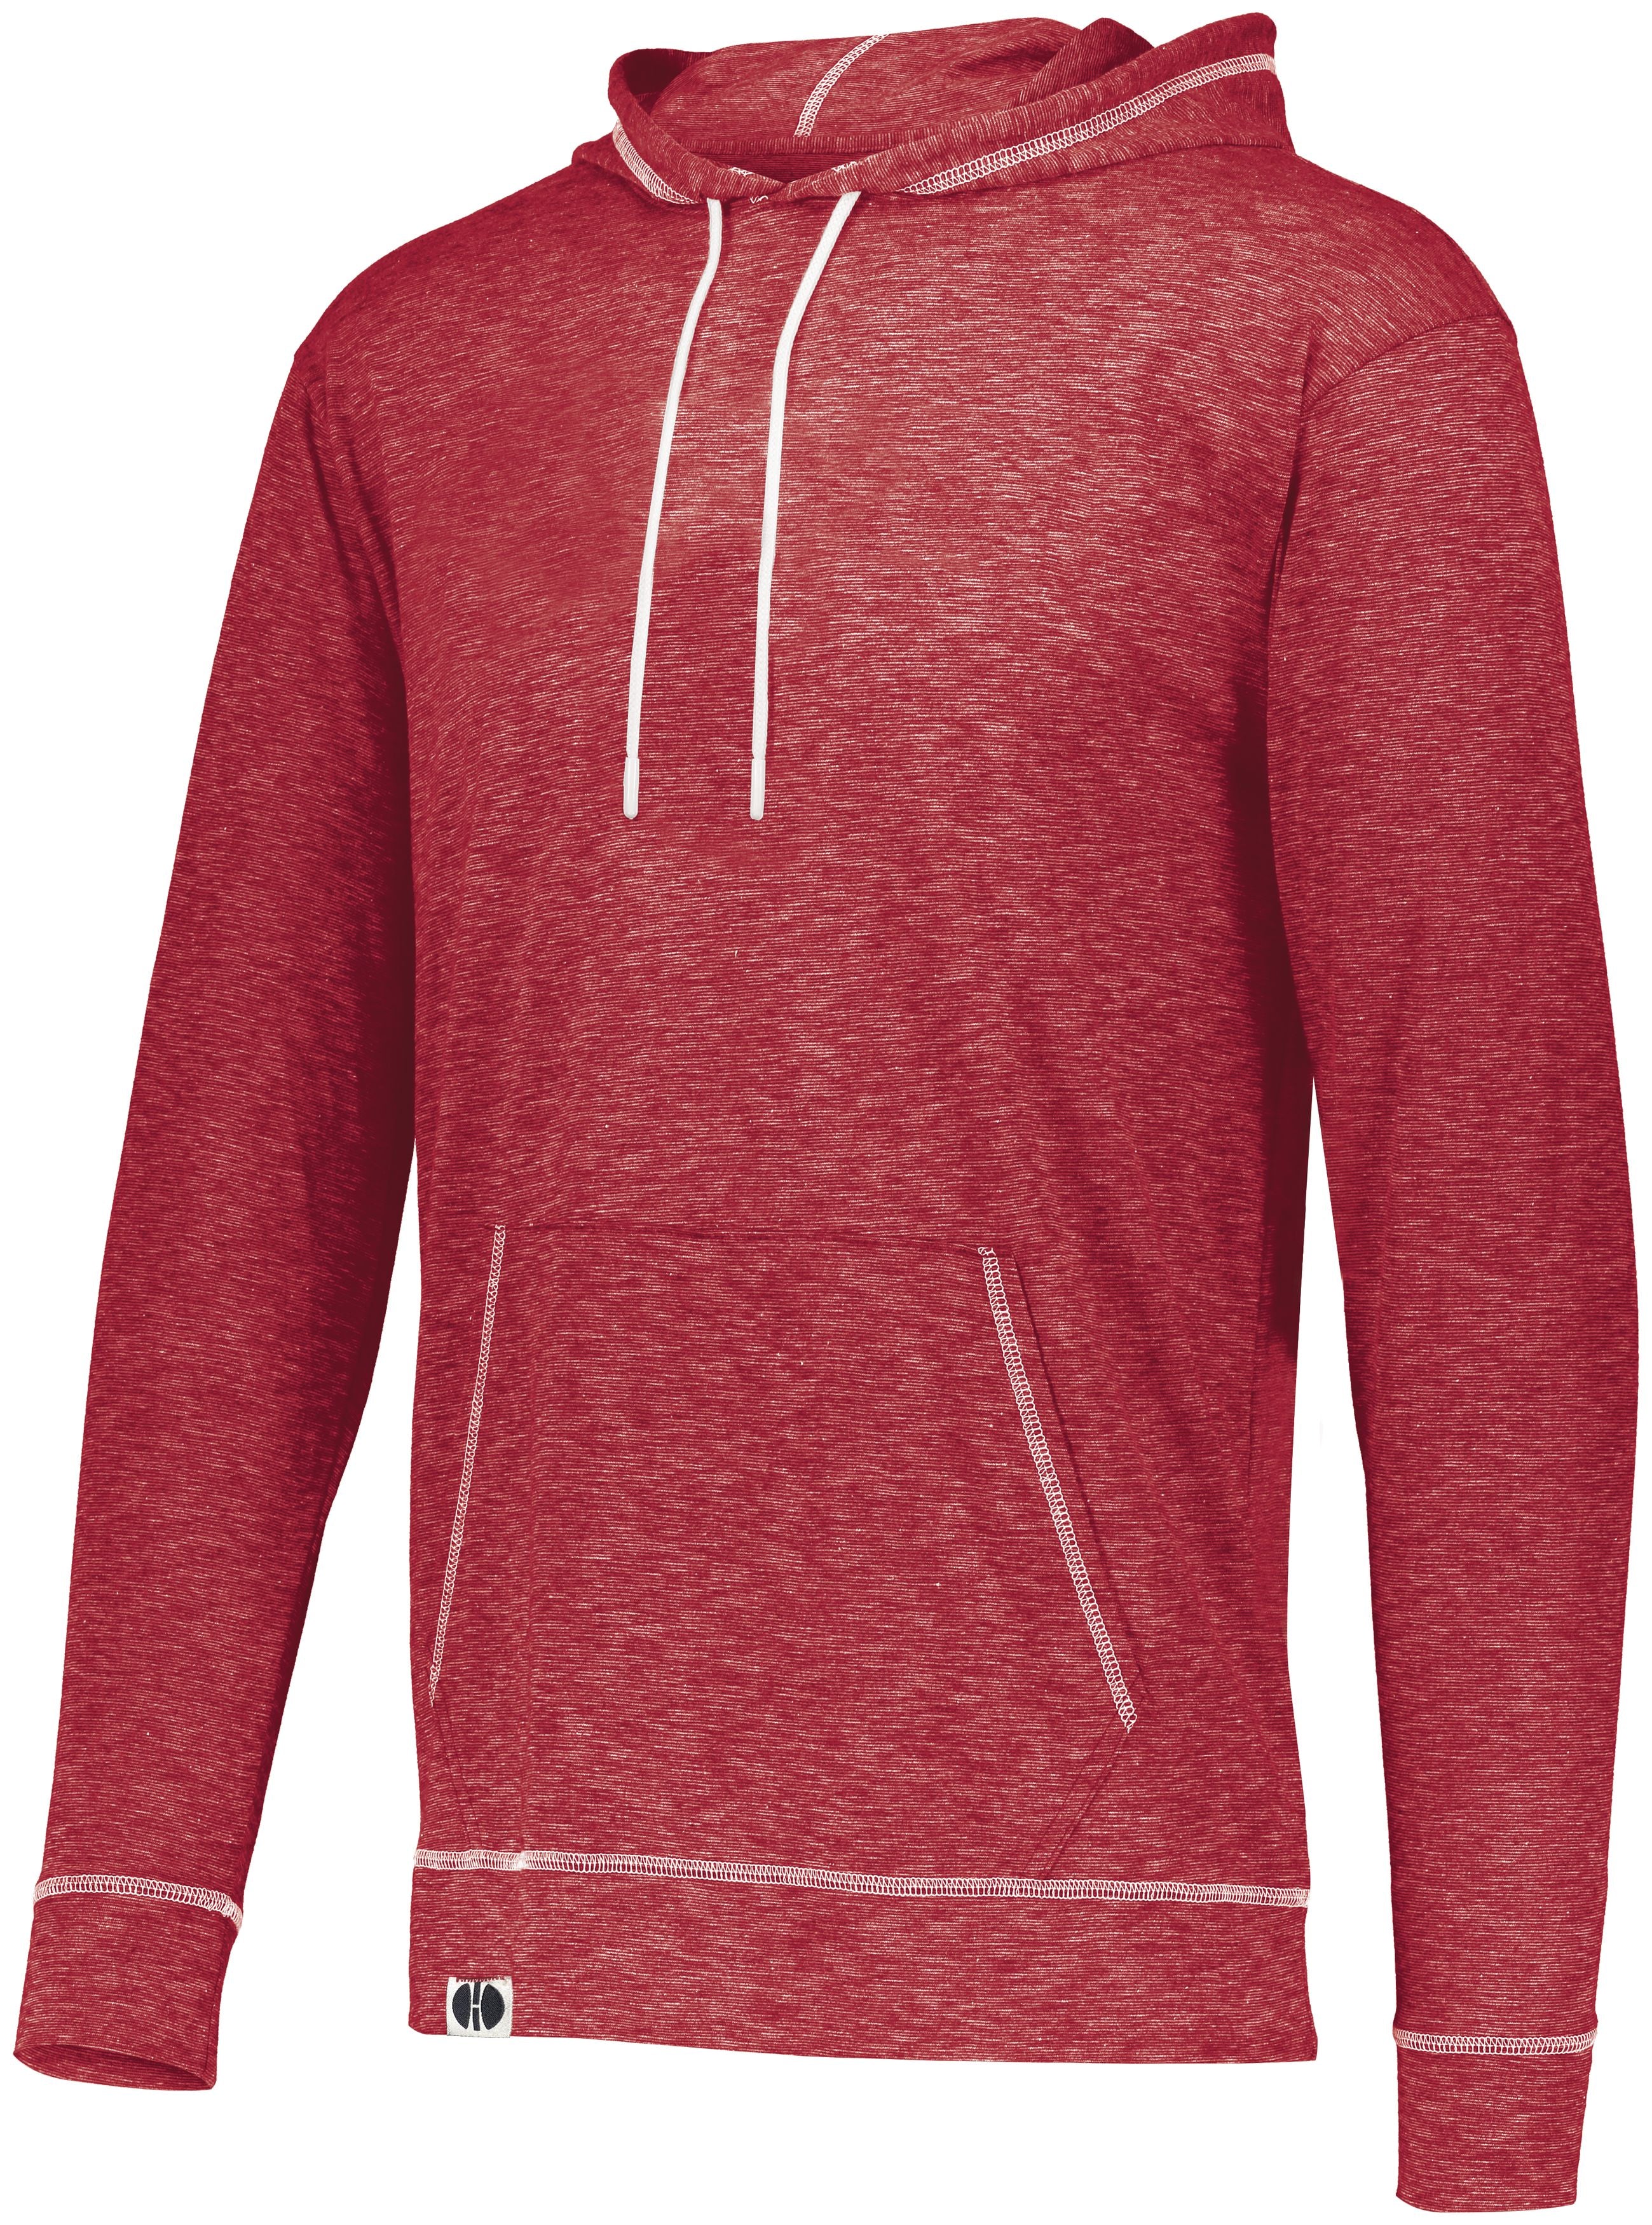 Holloway Journey Hoodie in Red  -Part of the Adult, Adult-Hoodie, Hoodies, Holloway product lines at KanaleyCreations.com